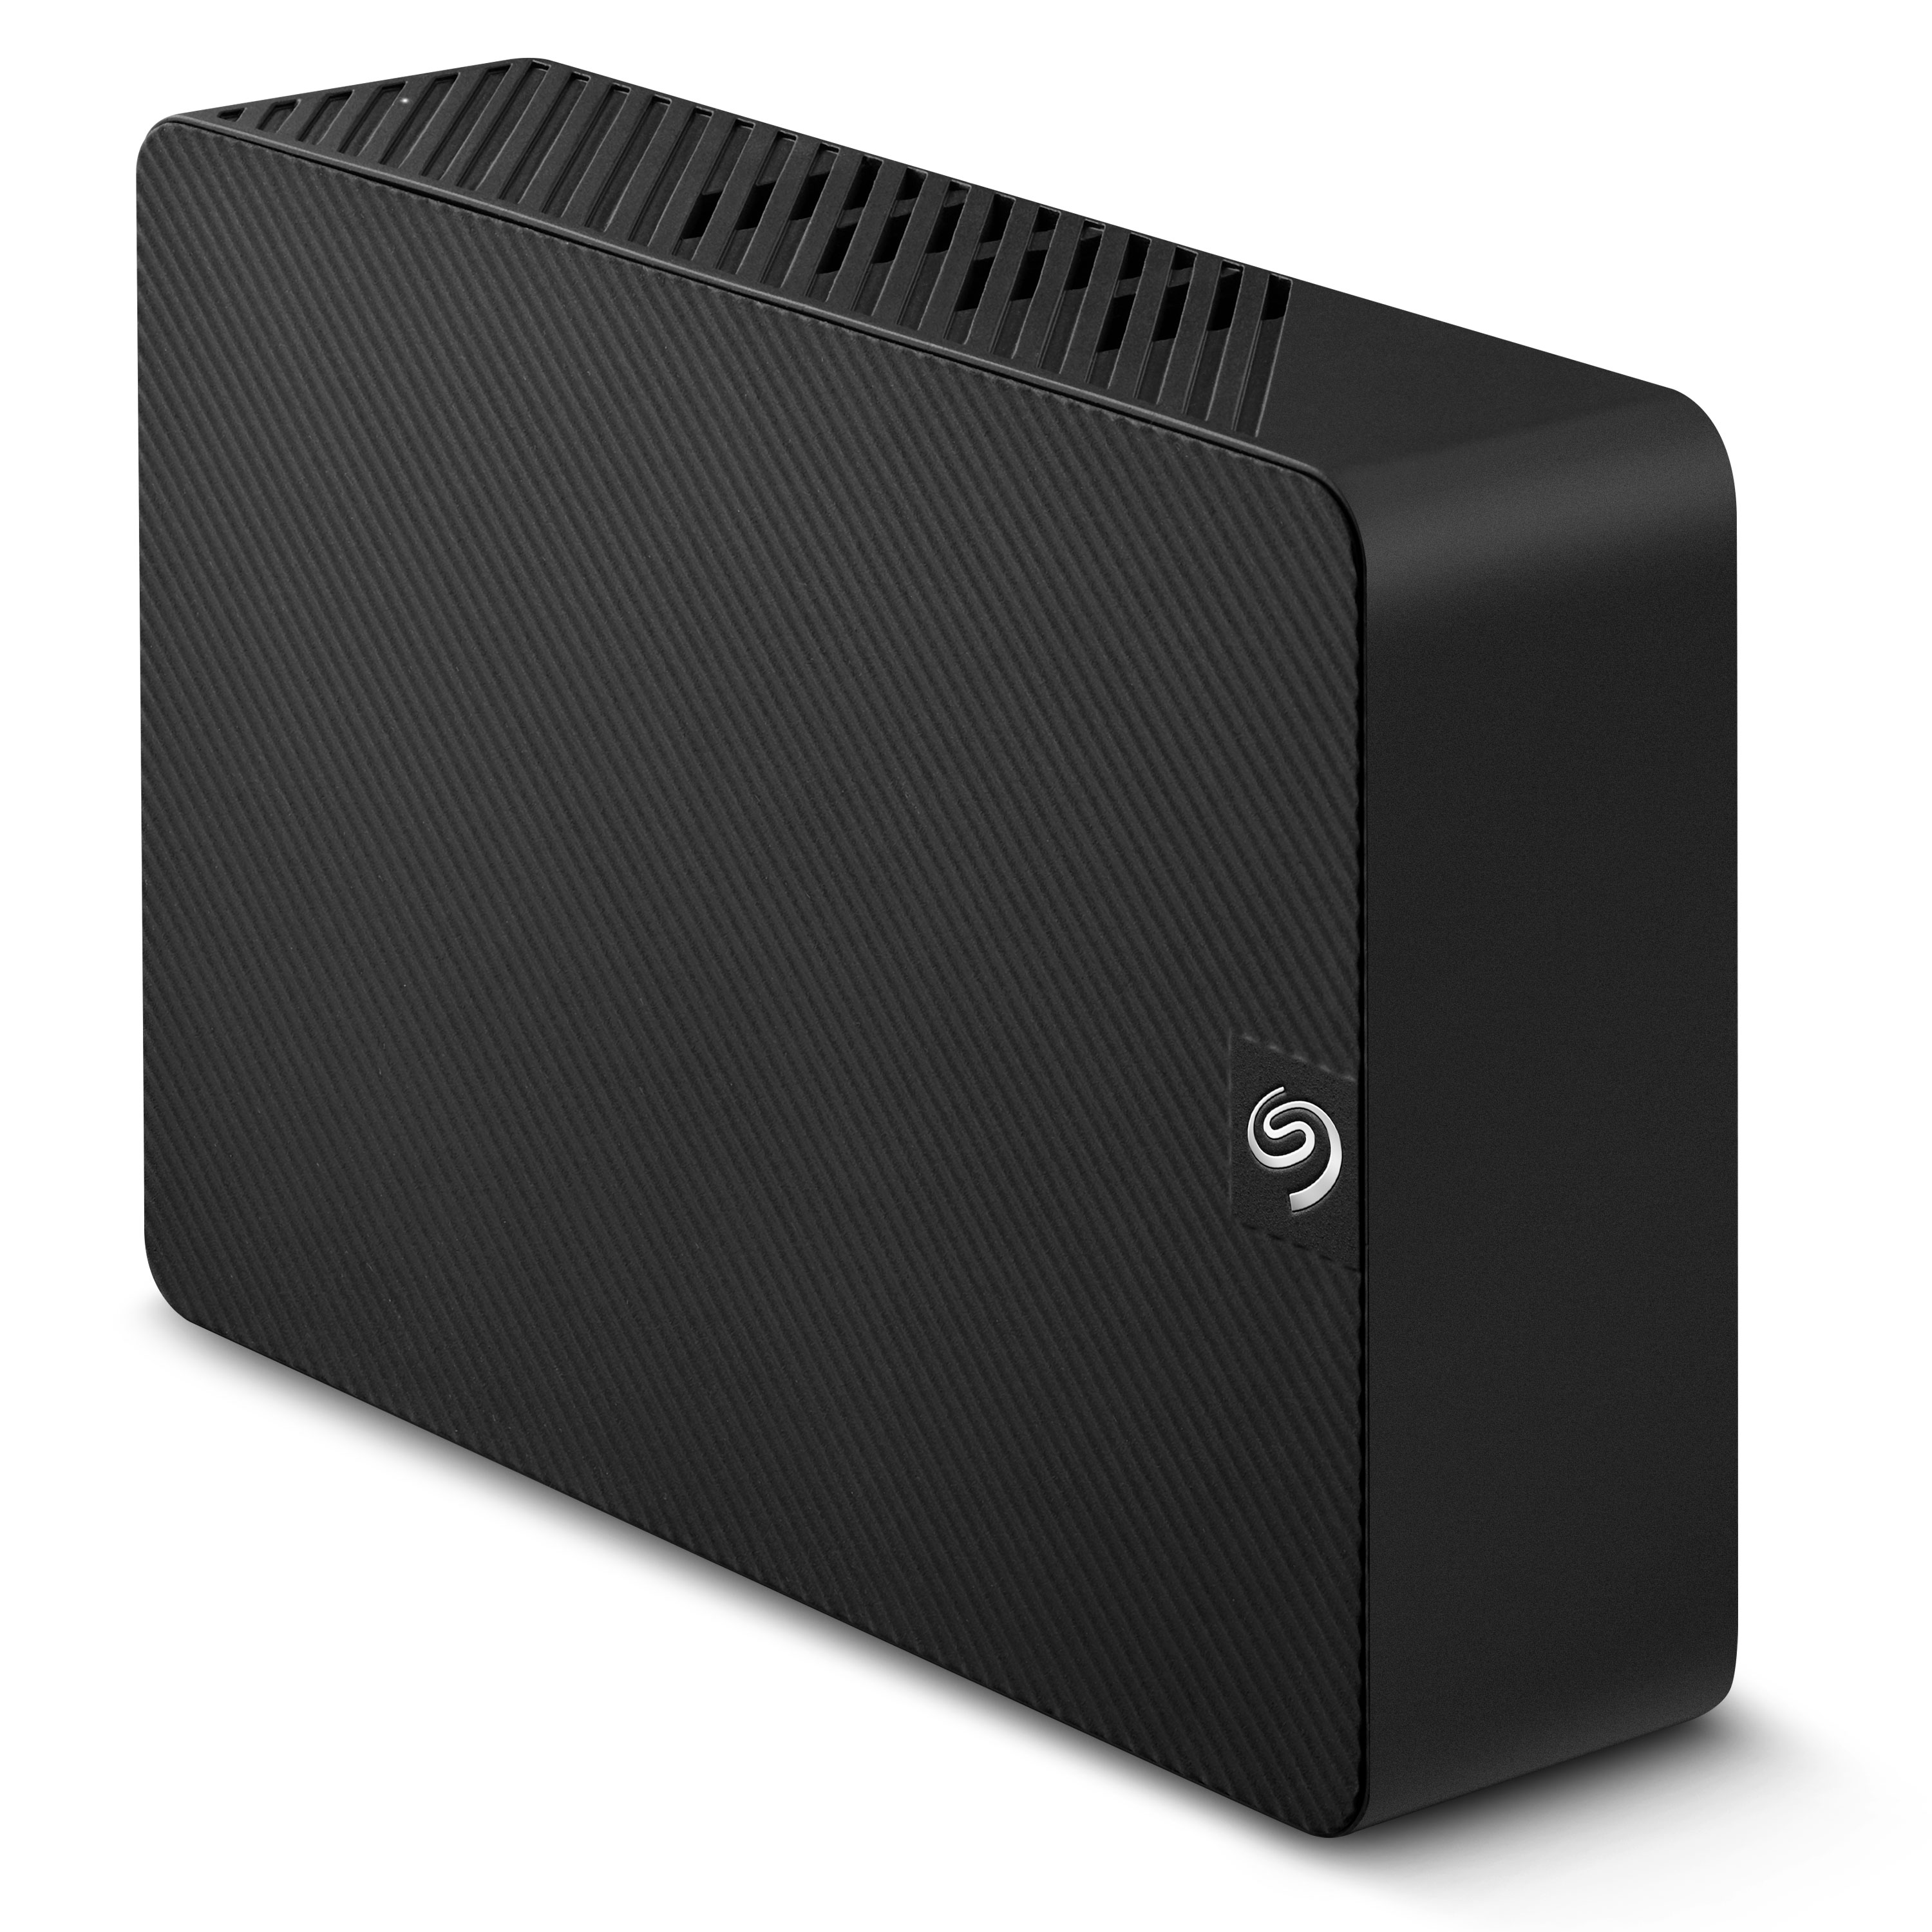 Seagate Expansion 6TB $105 free shipping, or ~$17.50/TB